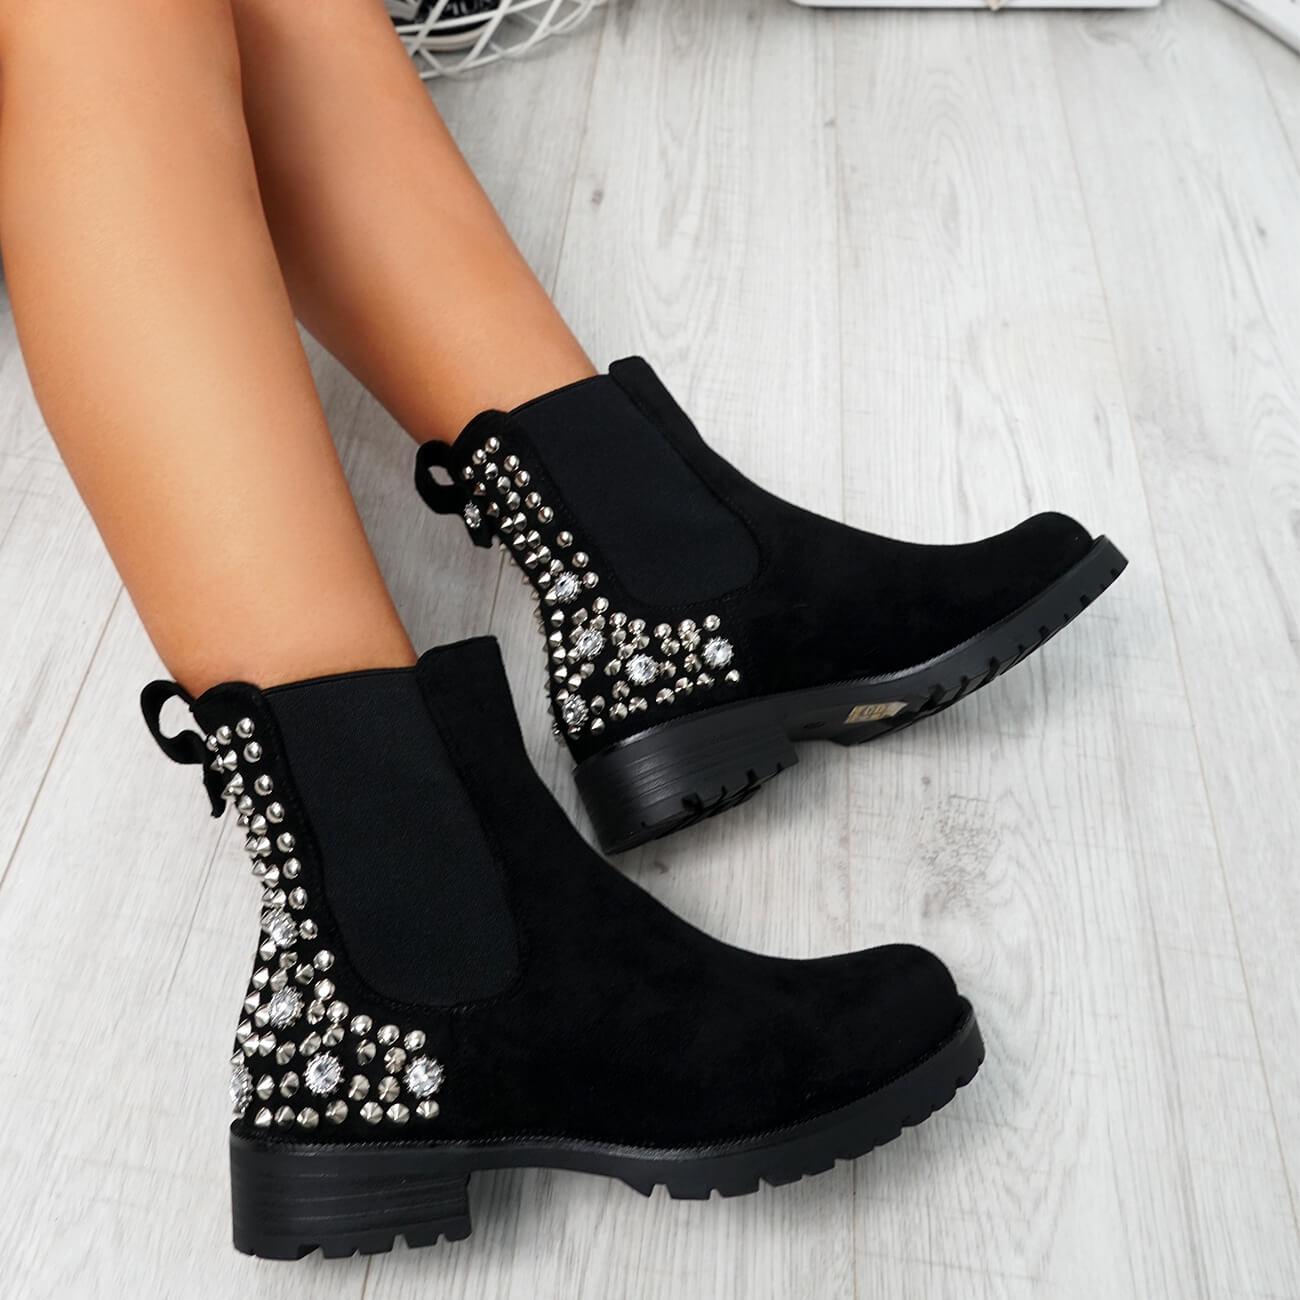 WOMENS LADIES CHELSEA ANKLE BOOTS SPIKE DIAMANTE STUDDED LOW HEEL SHOES ...